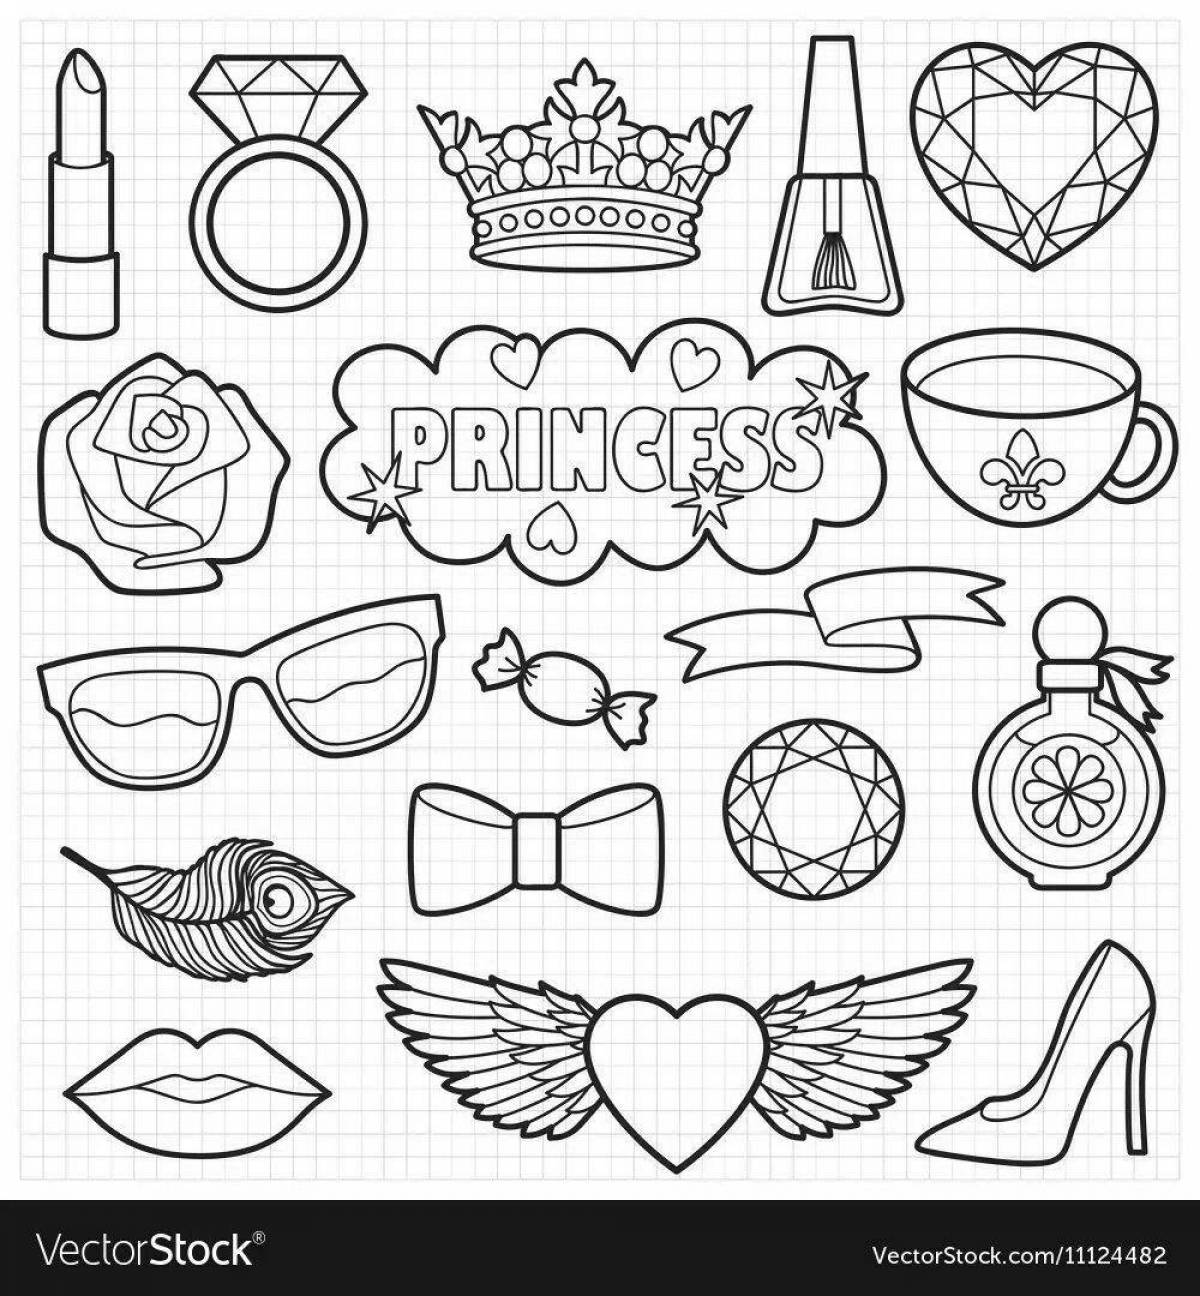 Great homemade sticker coloring page